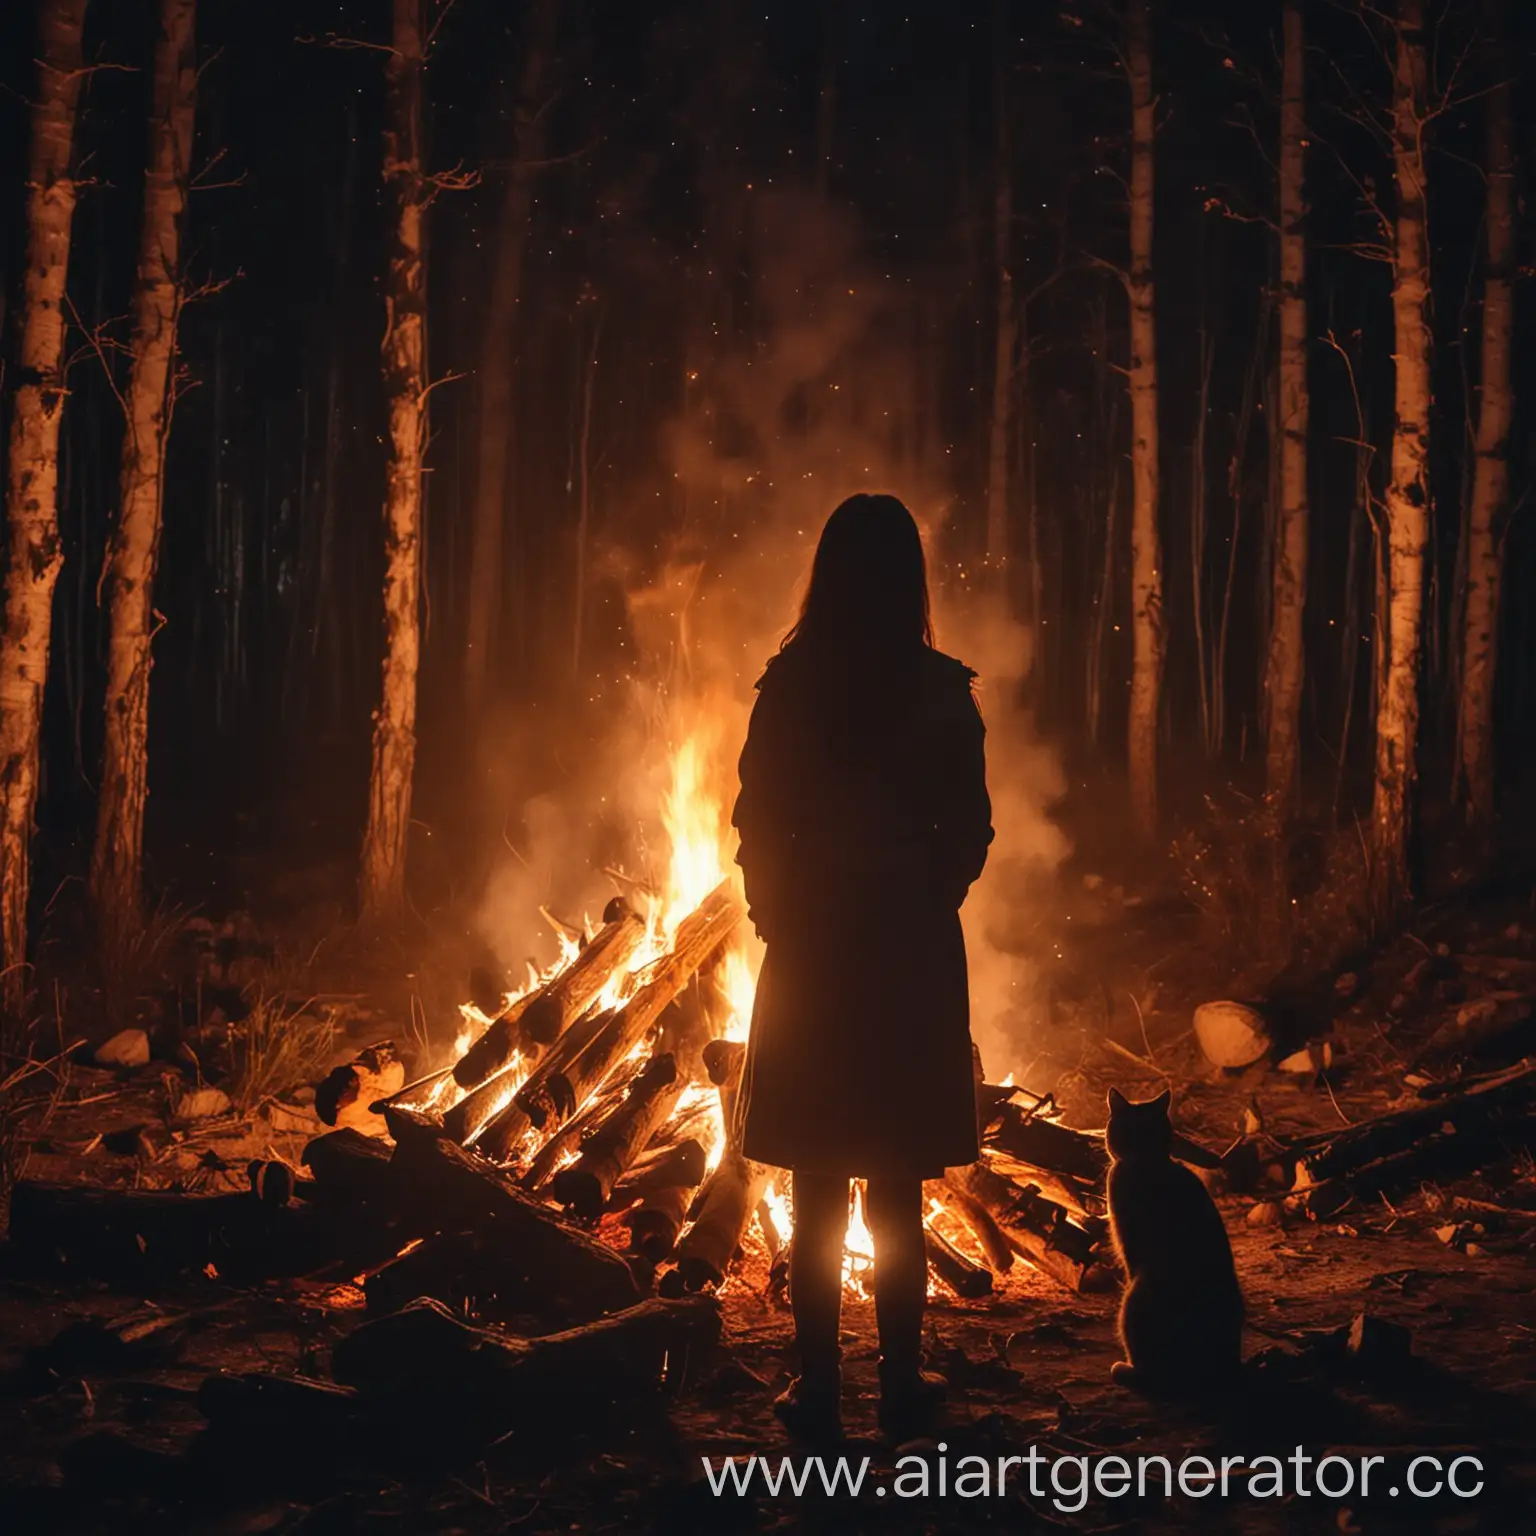 Girl-Standing-by-Forest-Bonfire-with-Cat-at-Night